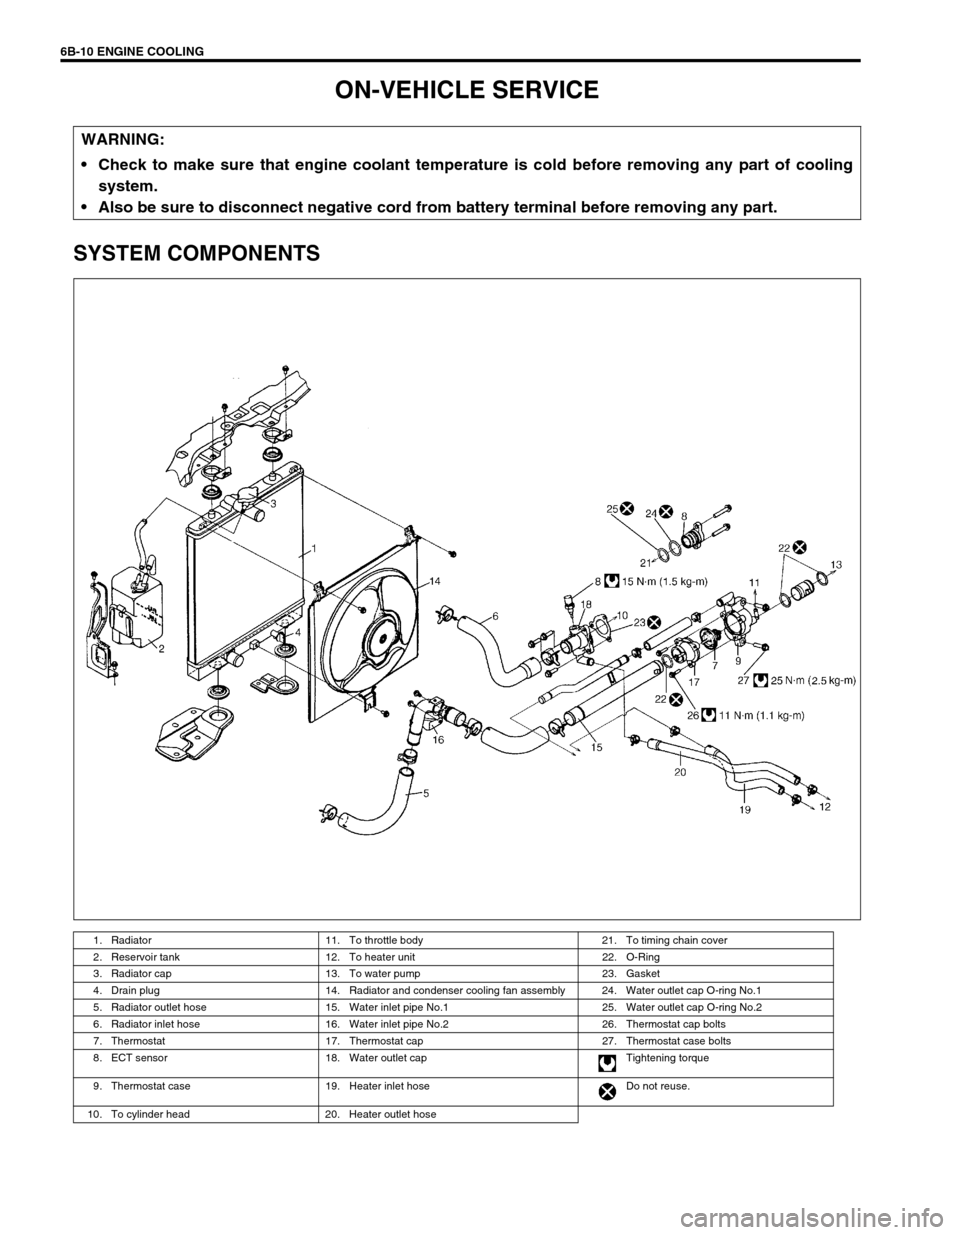 SUZUKI SWIFT 2000 1.G RG413 Service Service Manual 6B-10 ENGINE COOLING
ON-VEHICLE SERVICE
SYSTEM COMPONENTS
WARNING:
Check to make sure that engine coolant temperature is cold before removing any part of cooling
system.
Also be sure to disconnect n